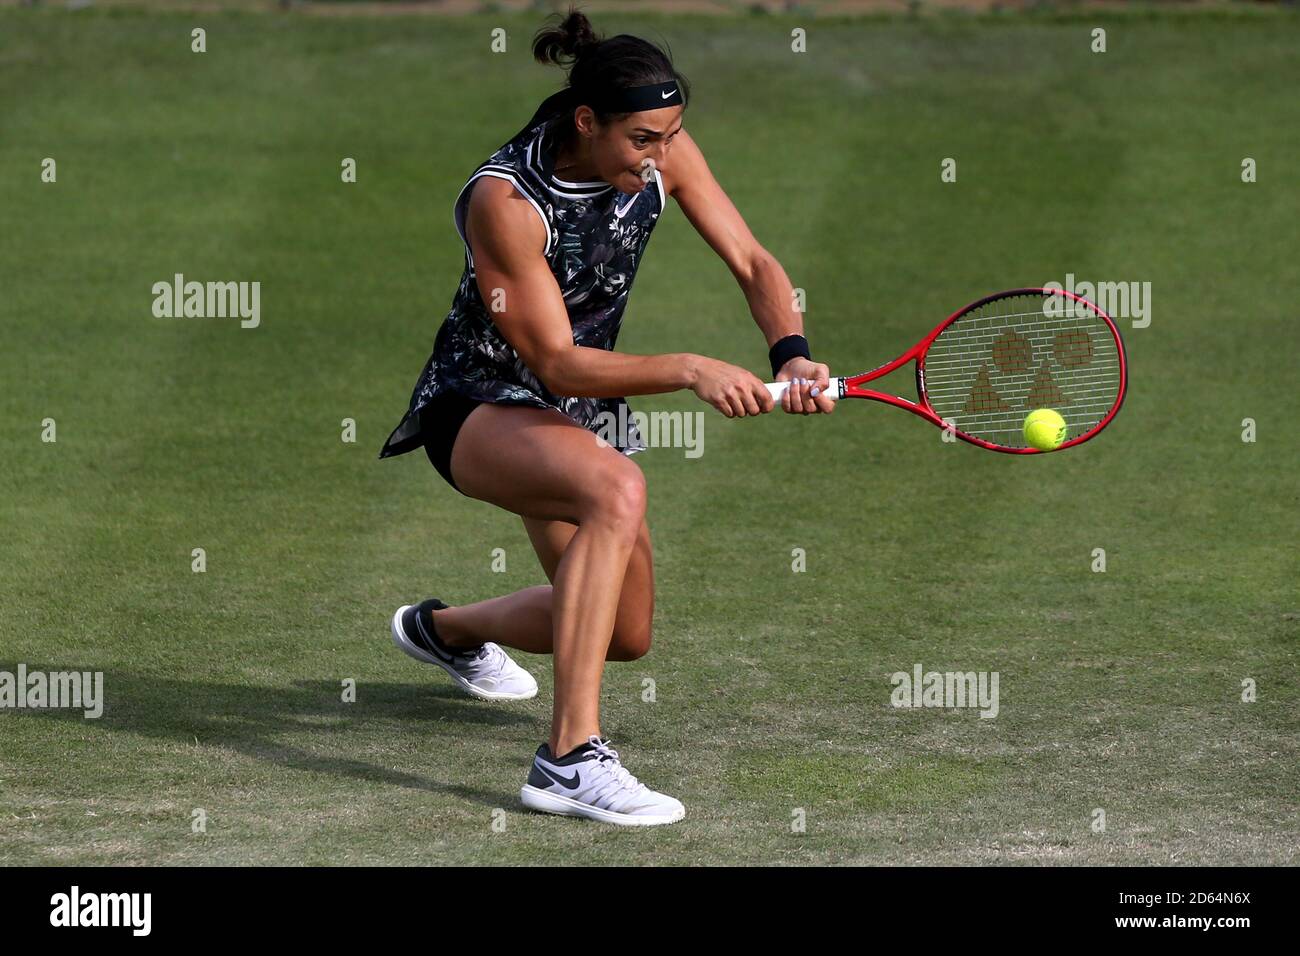 France's Caroline Garcia against Croatia's Donna Vekic in the women's singles final during day nine of the Nature Valley Open at Nottingham Tennis Centre. Stock Photo